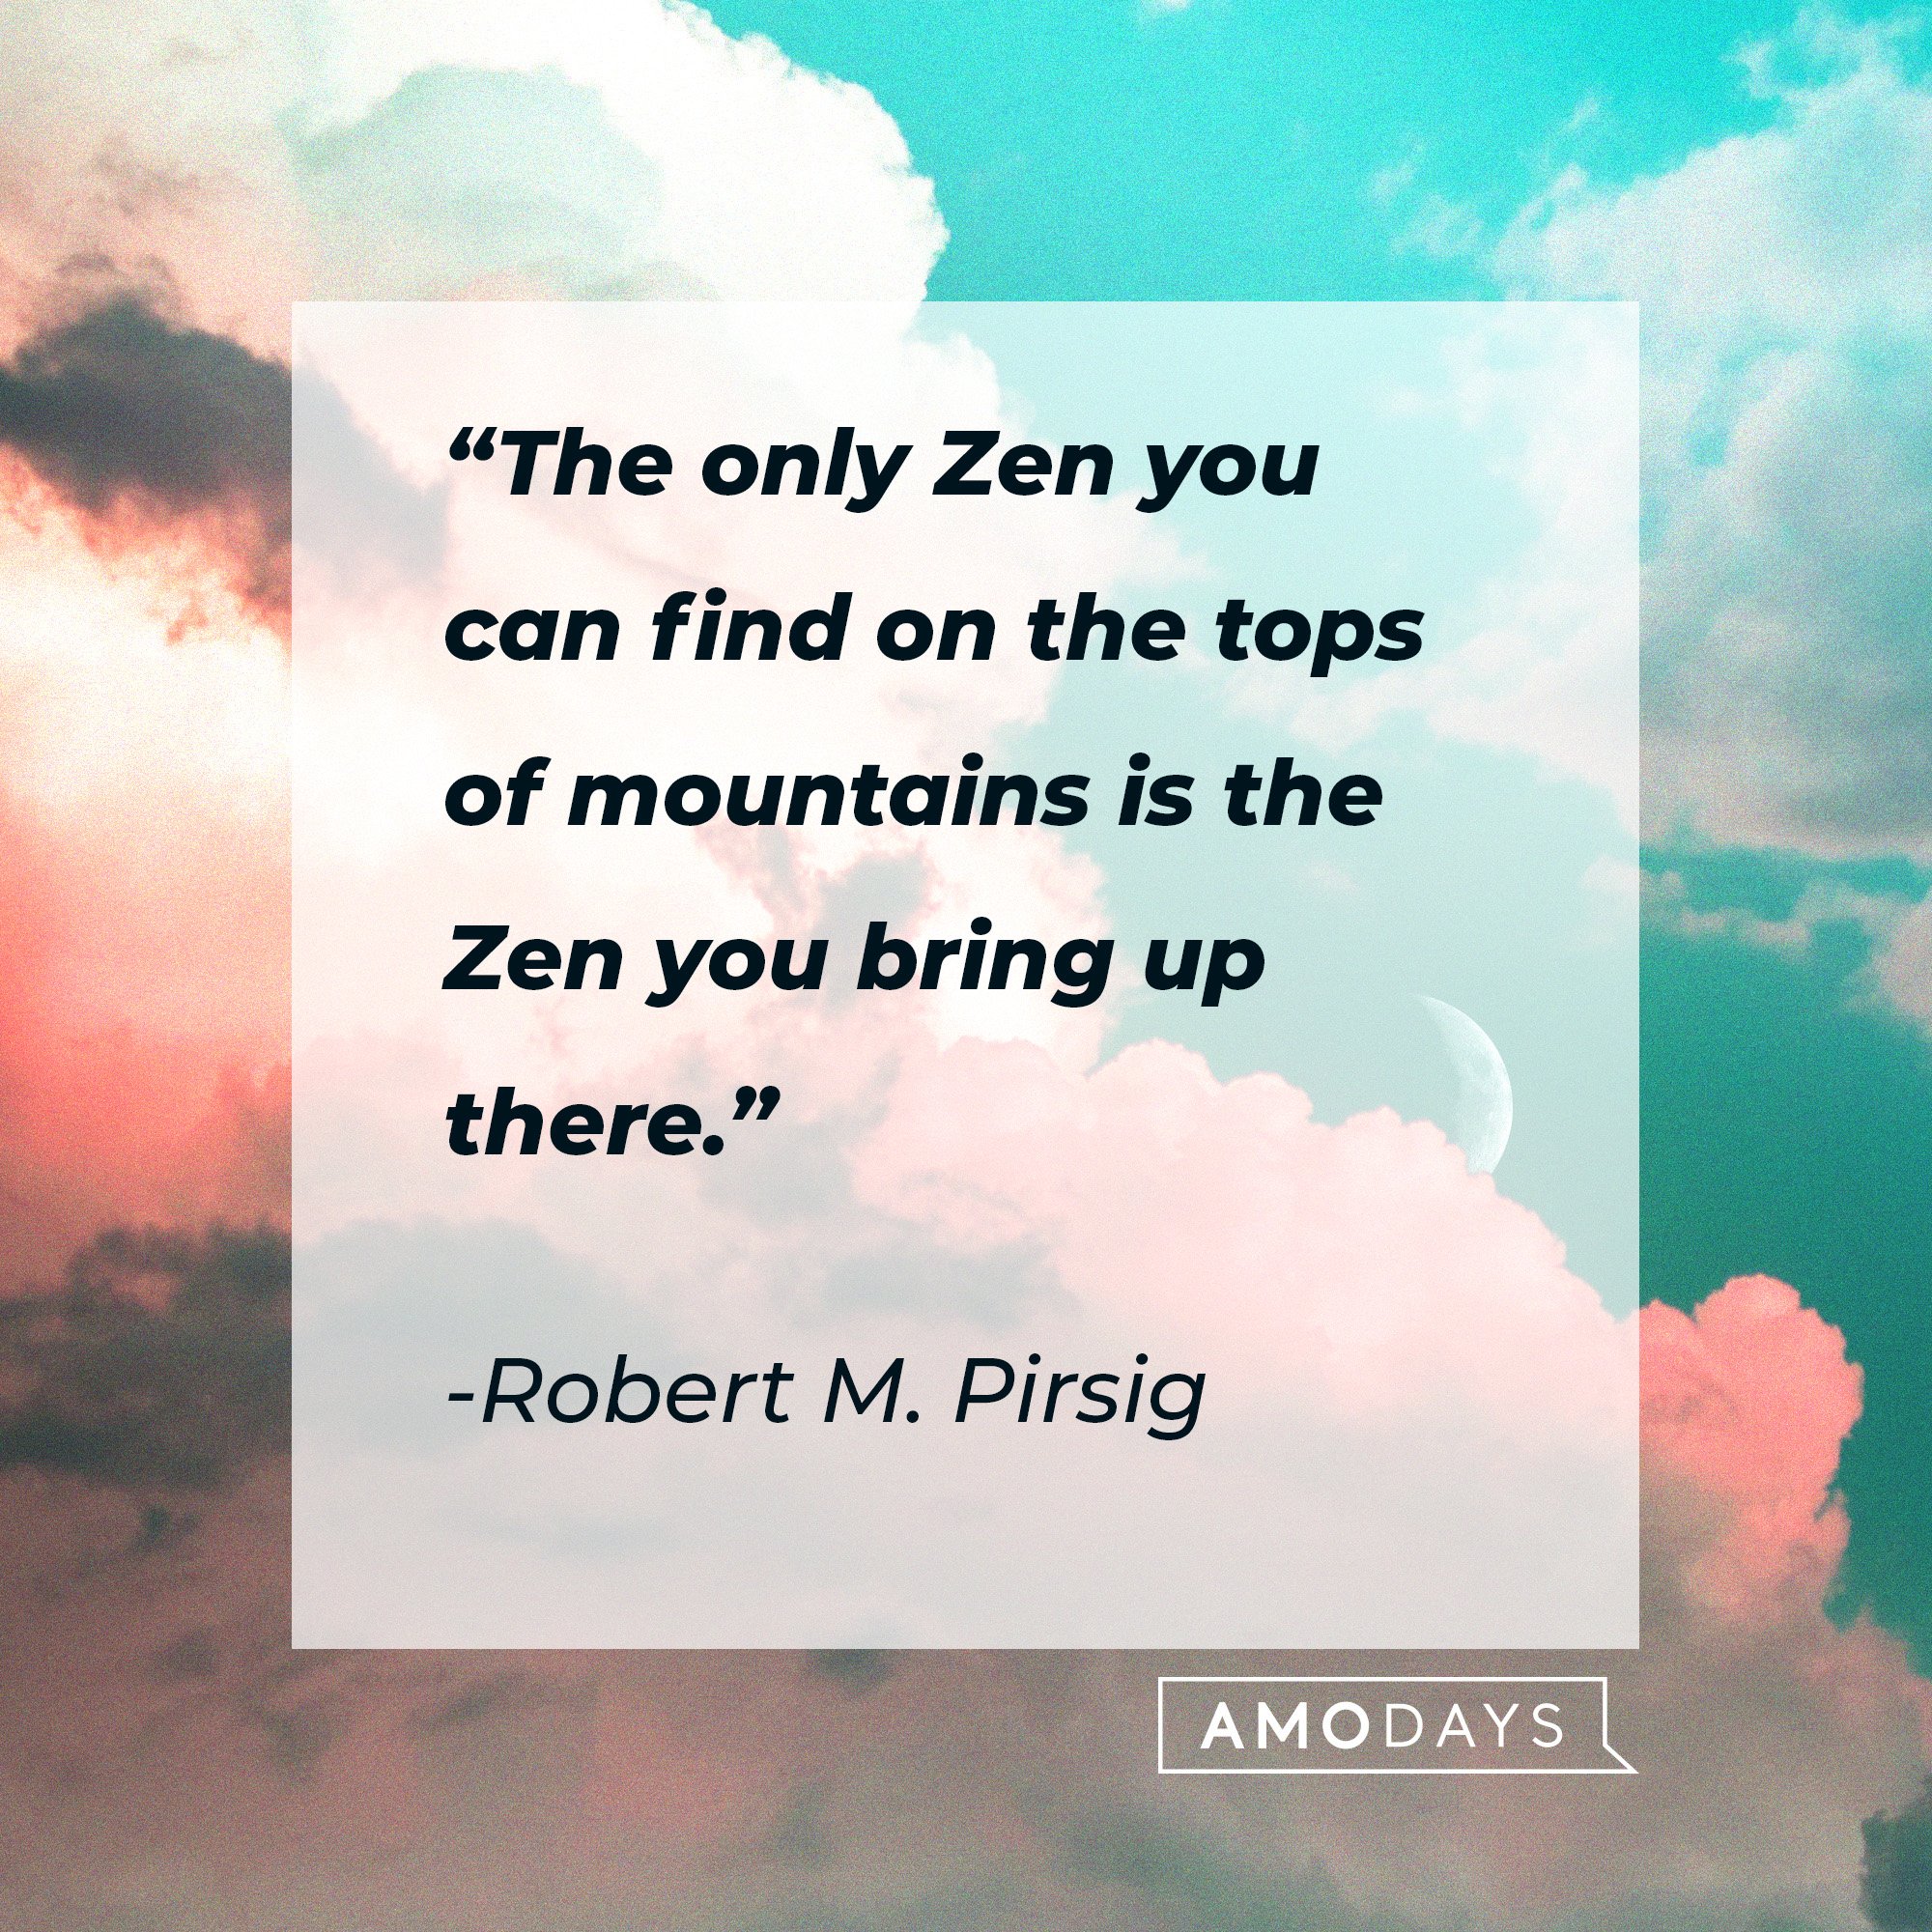 Robert M. Pirsig 's quote: “The only Zen you can find on the tops of mountains is the Zen you bring up there.” | Image: AmoDays